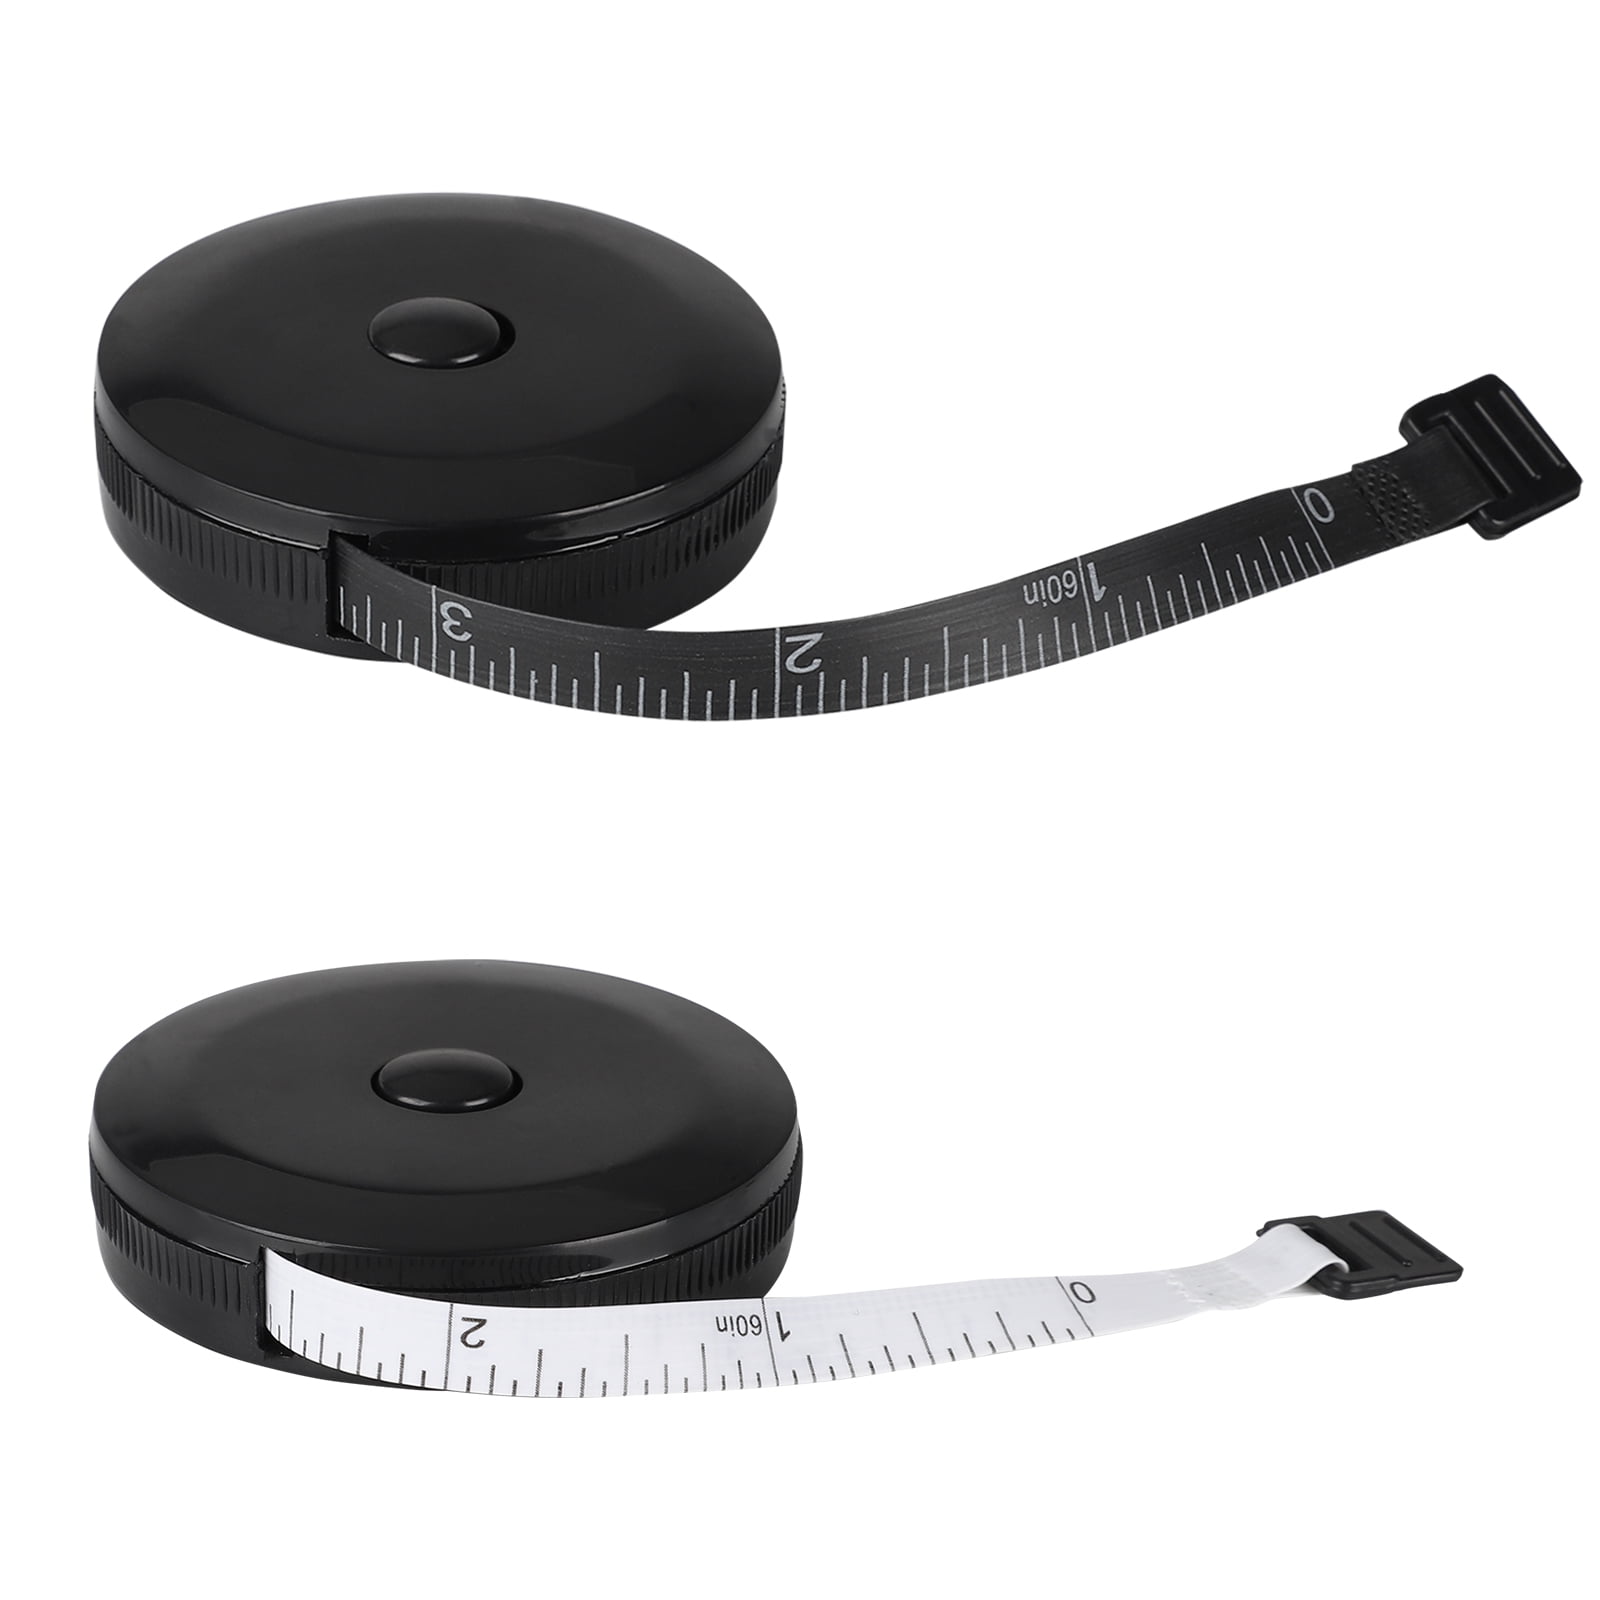 Jean Products Tailors Measuring Tape Glass Fibre Plastic 1.5 m Black/White Comes With Small Transparent Storage Box 